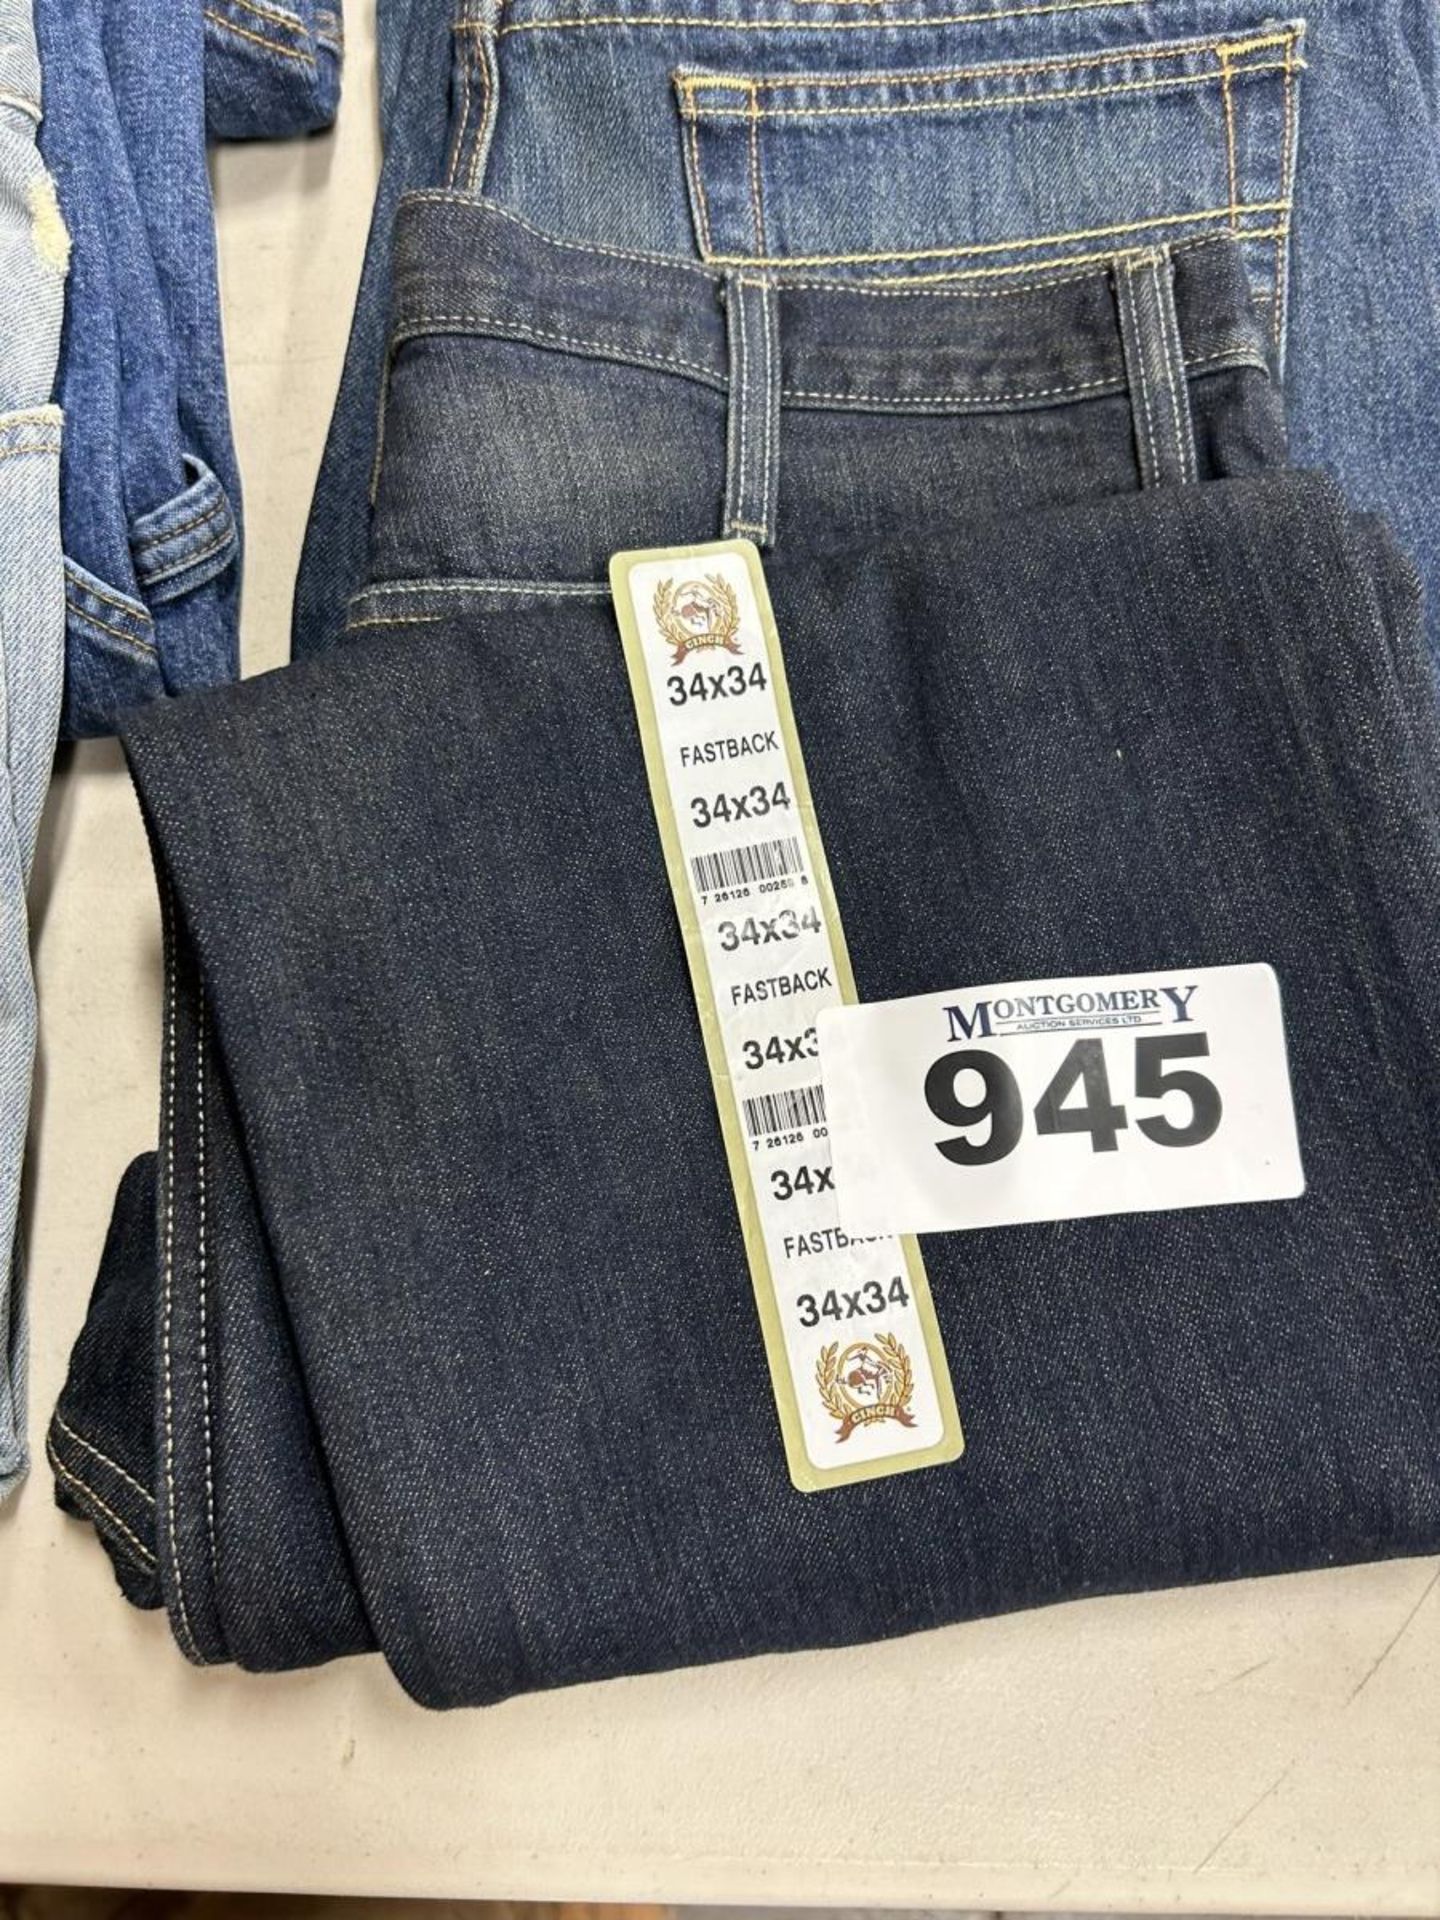 3 PAIRS OF JEANS: WRANGLERS 30X34, CINCH 30X34, CINCH 34X34 - Image 2 of 5